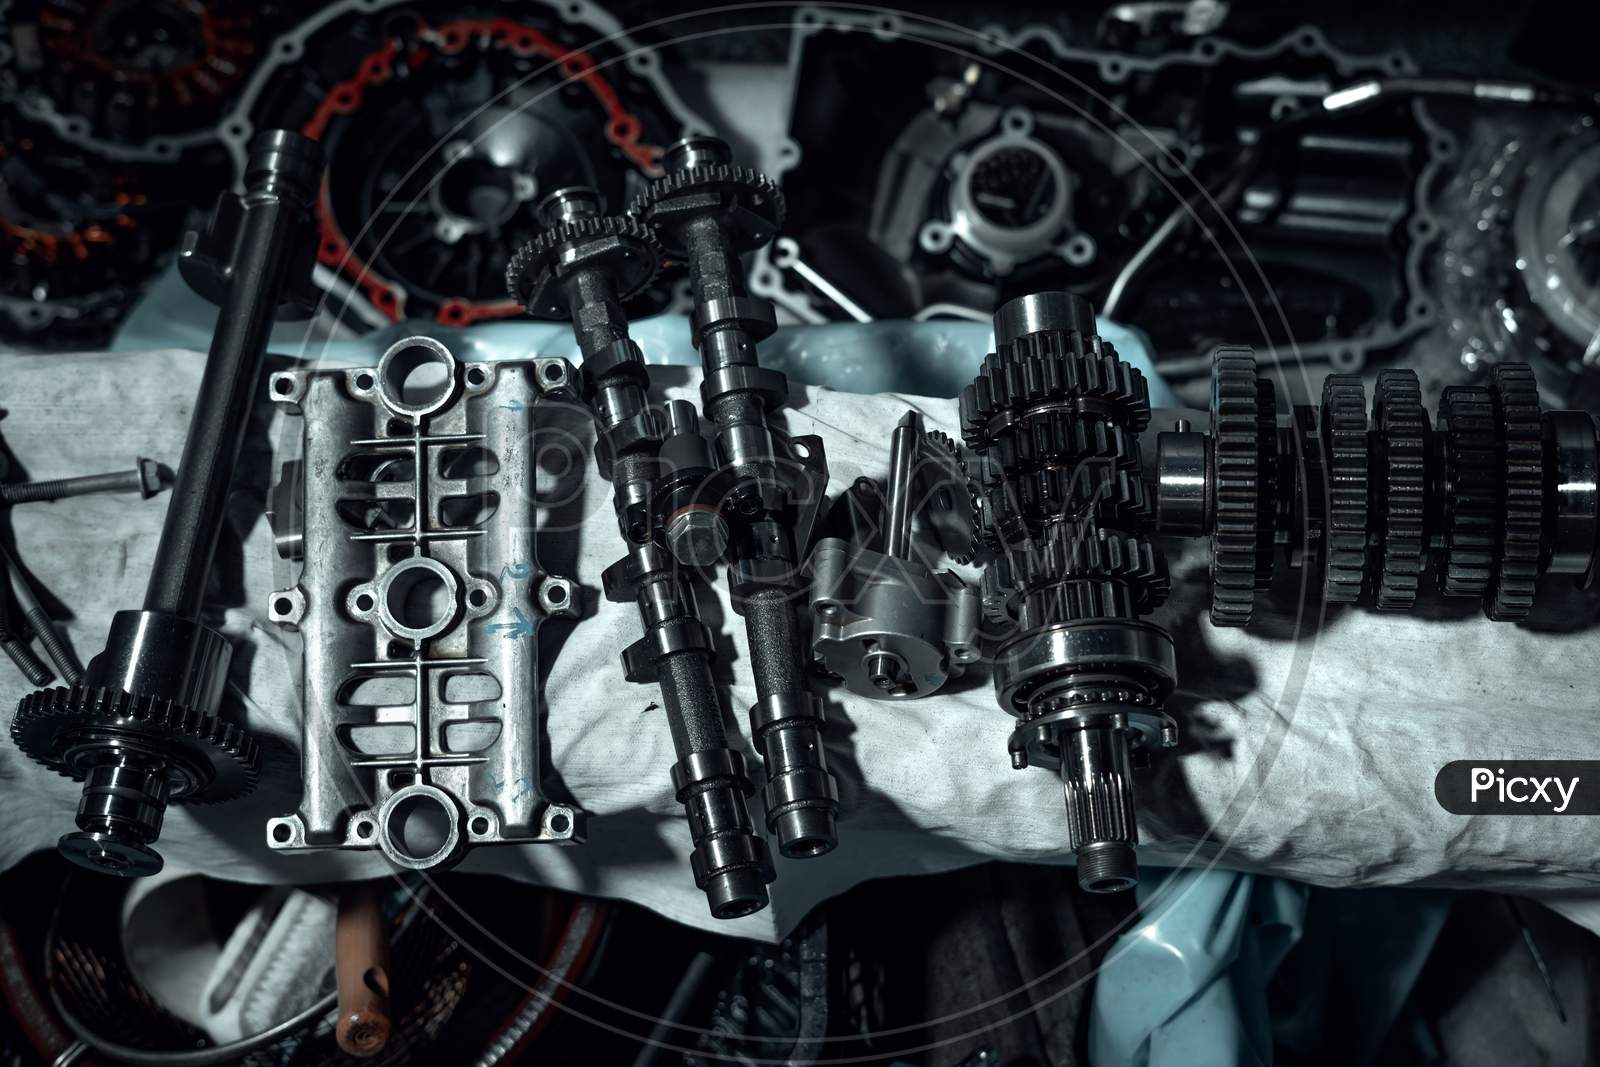 Disassembled fast motorcycle engine with visible parts